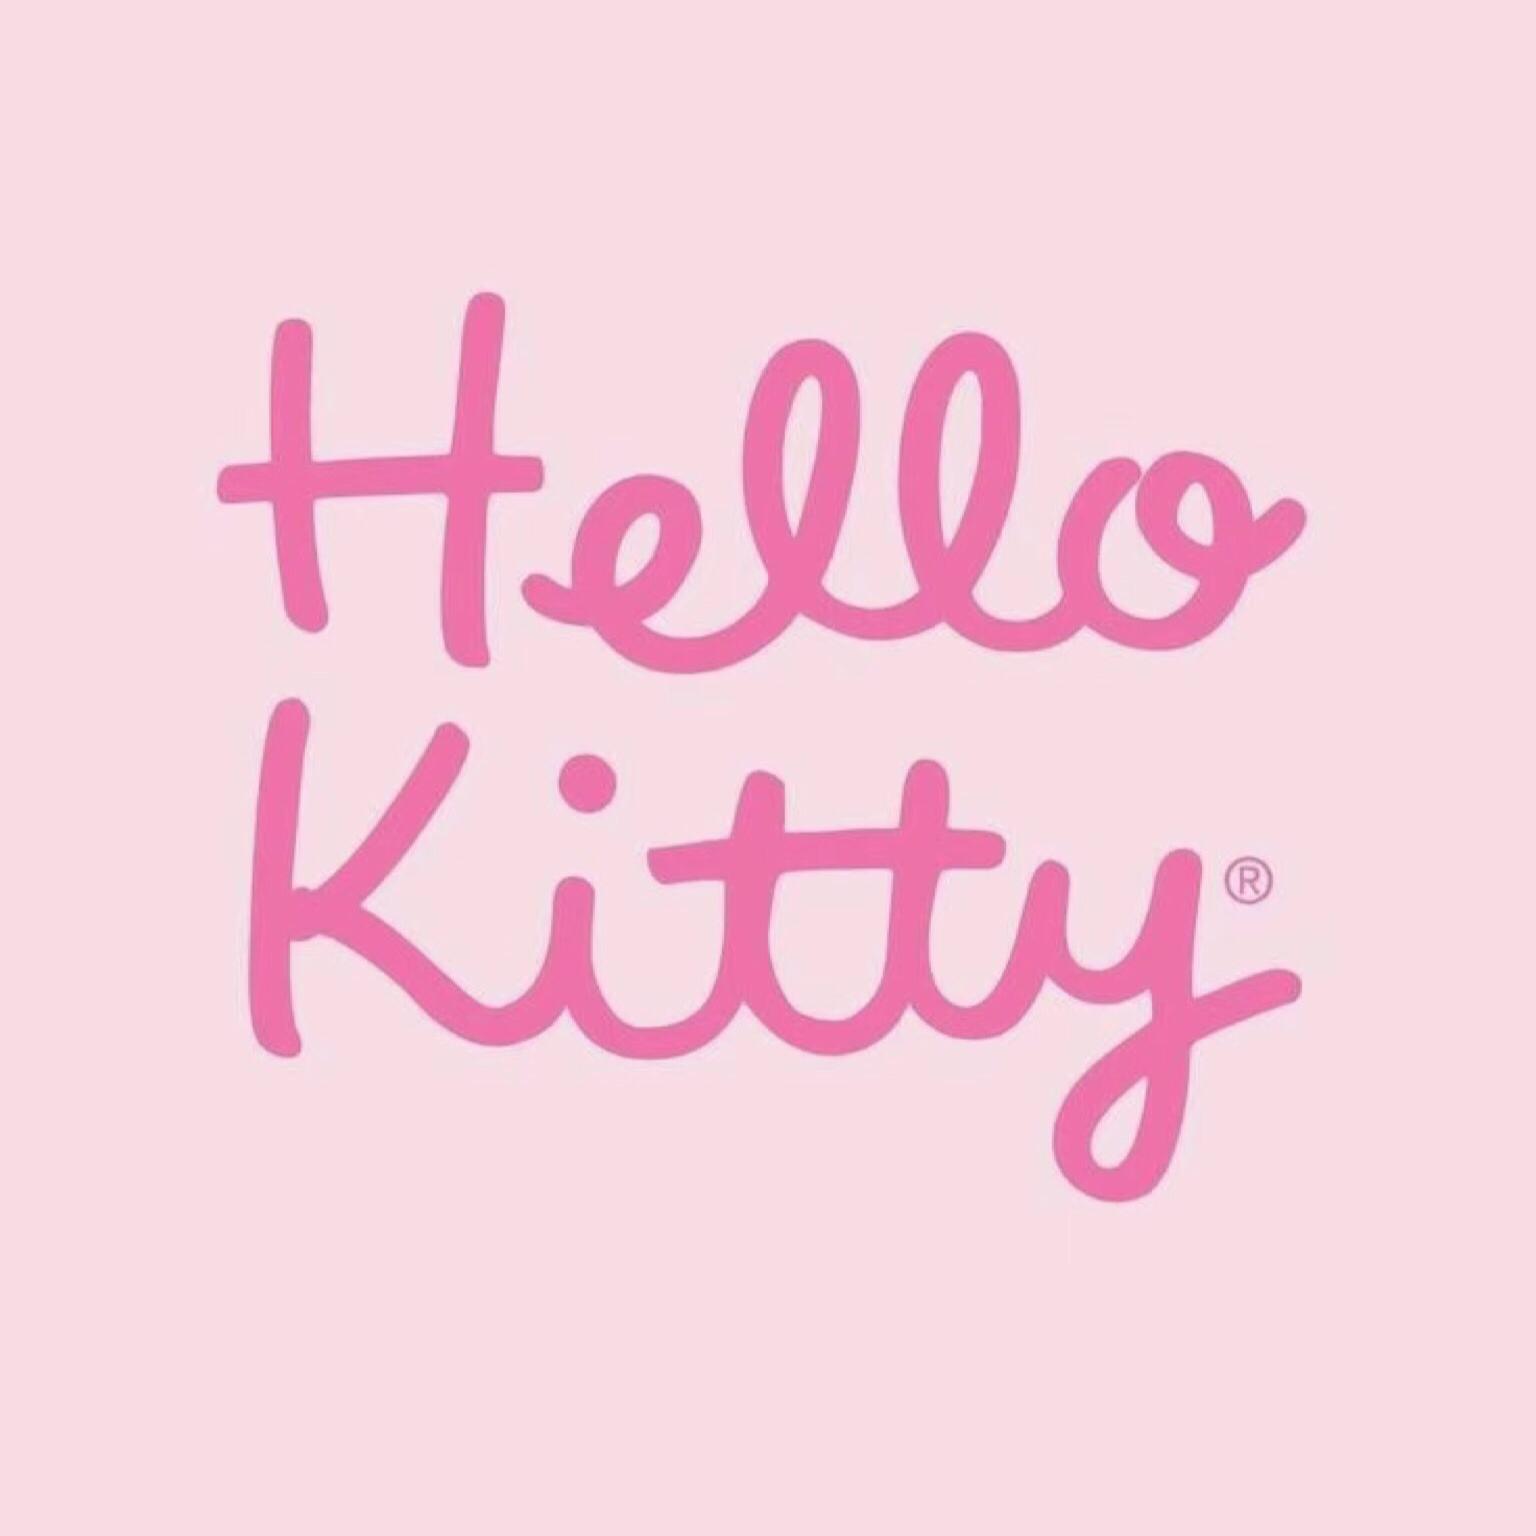 Hello kitty 's images